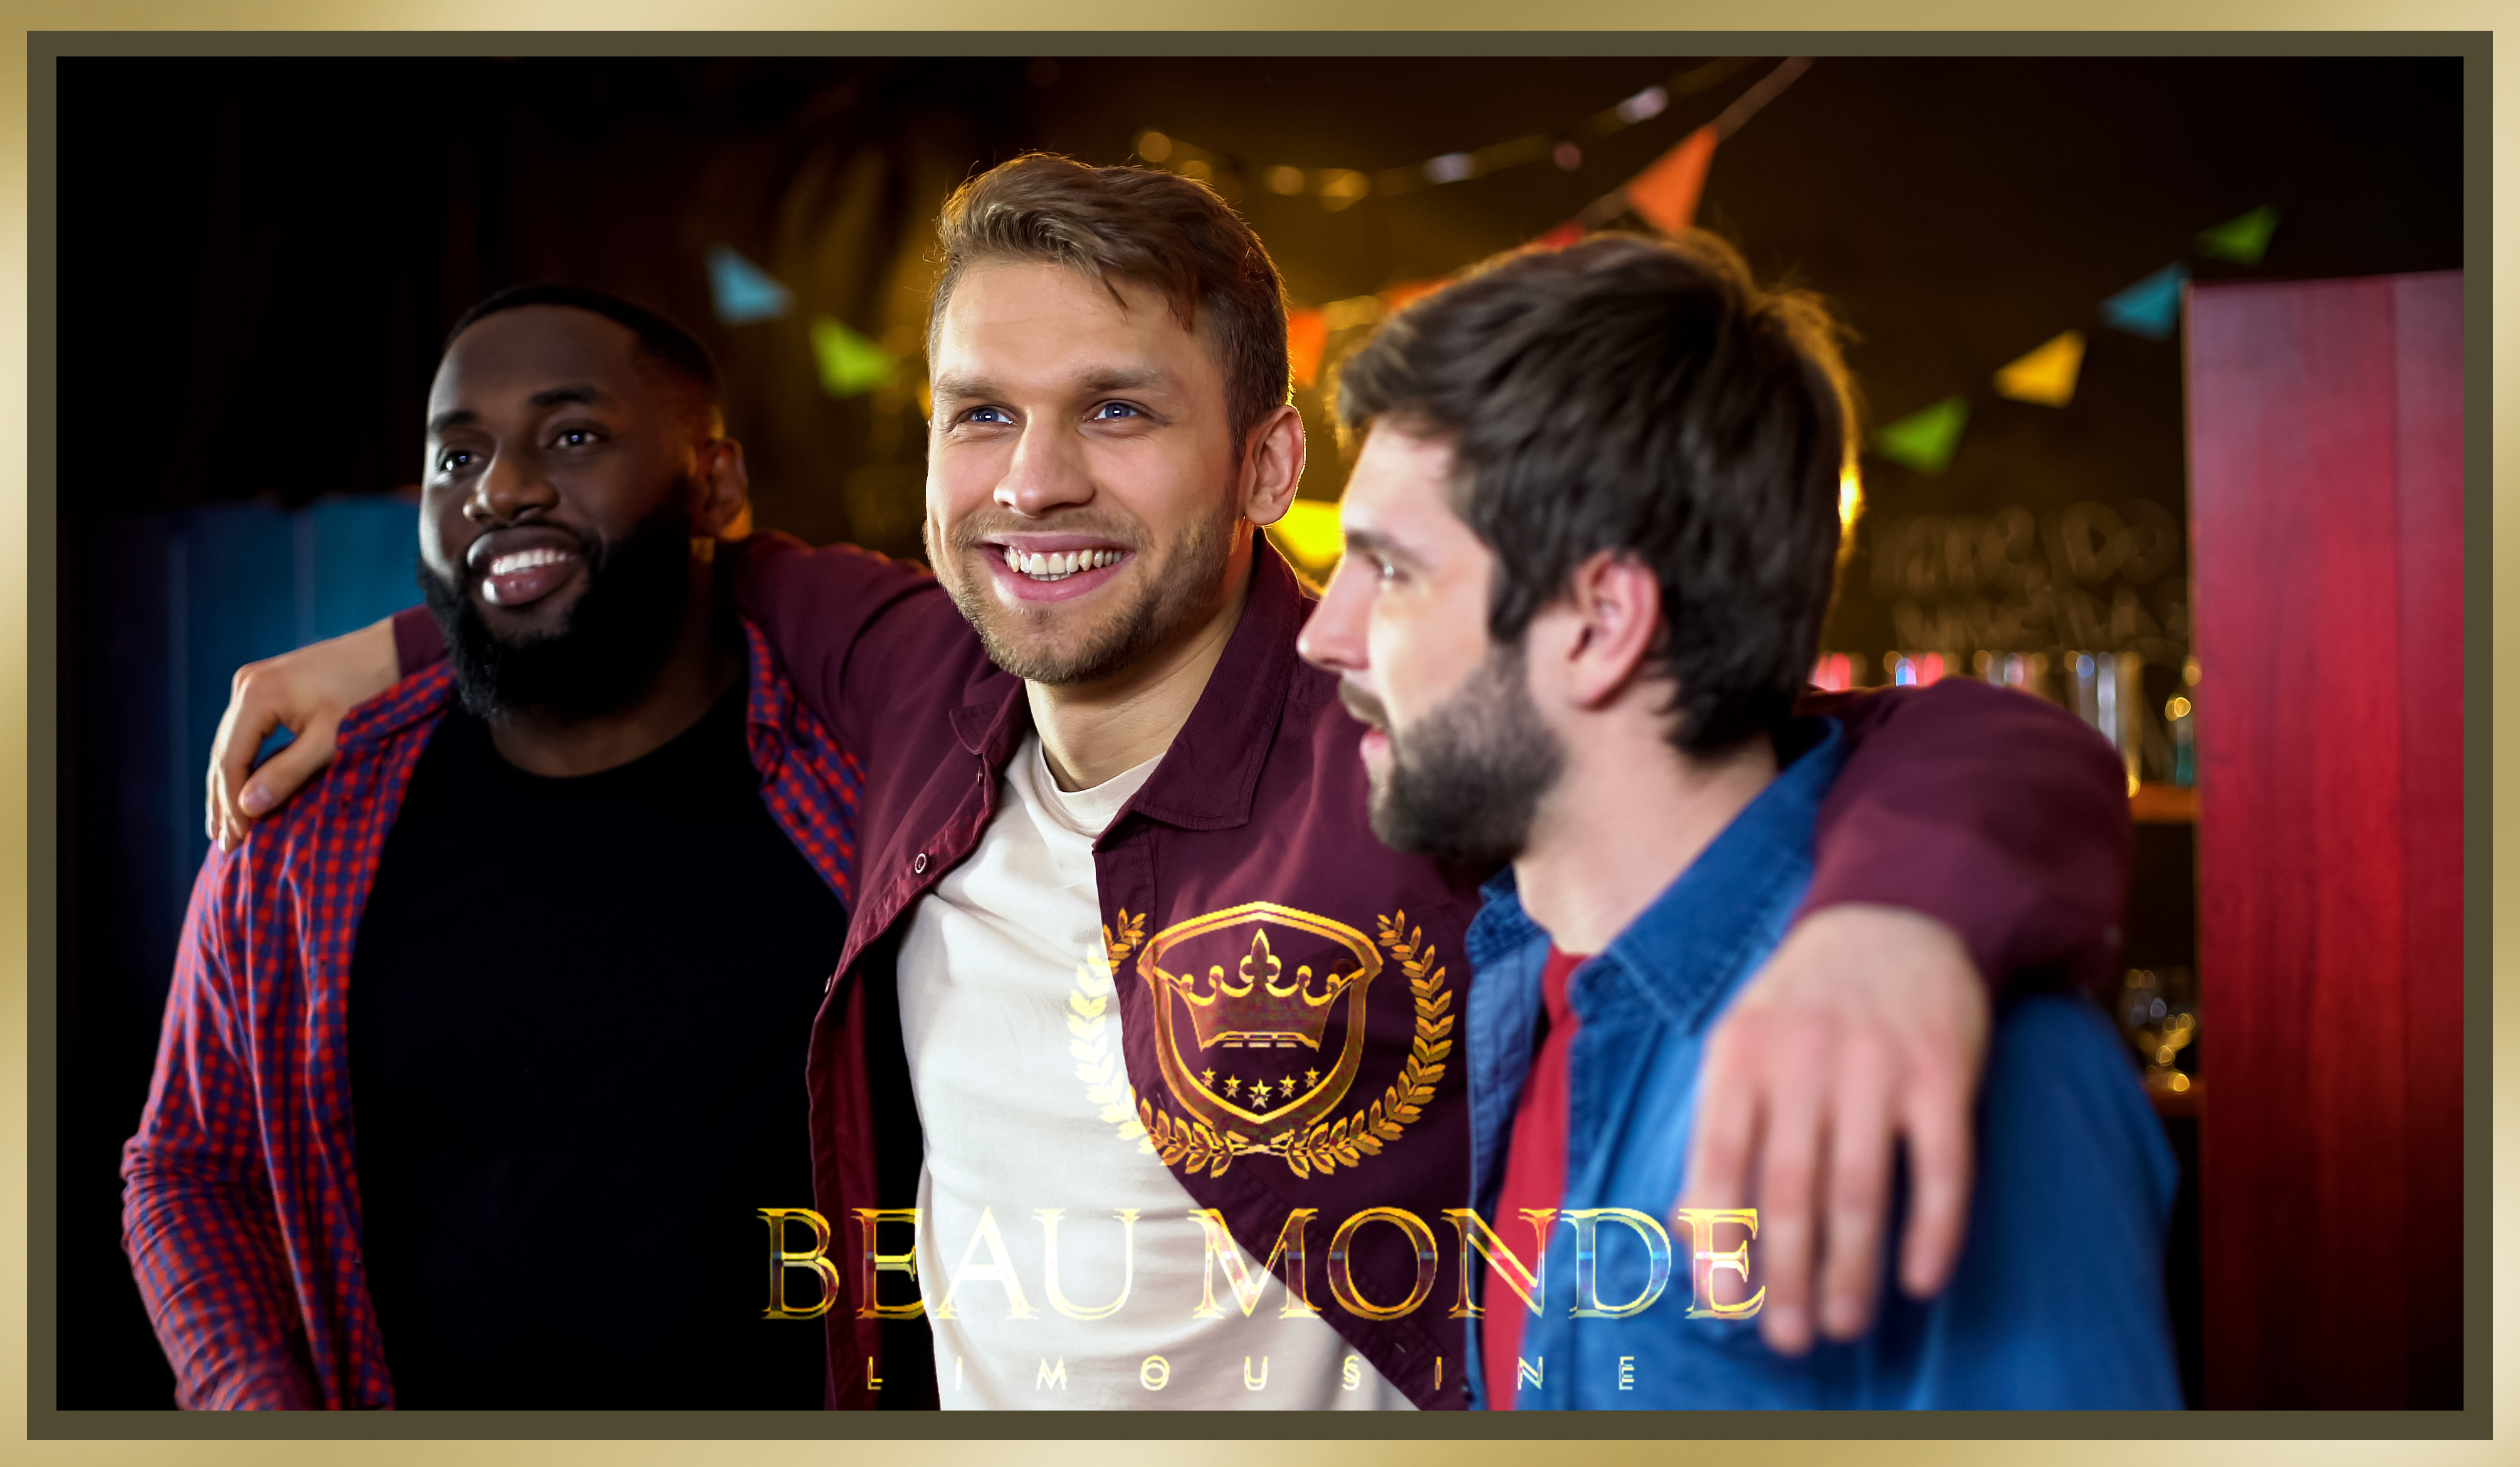 Men enjoying night out in Portland Oregon with bachelor party limo services